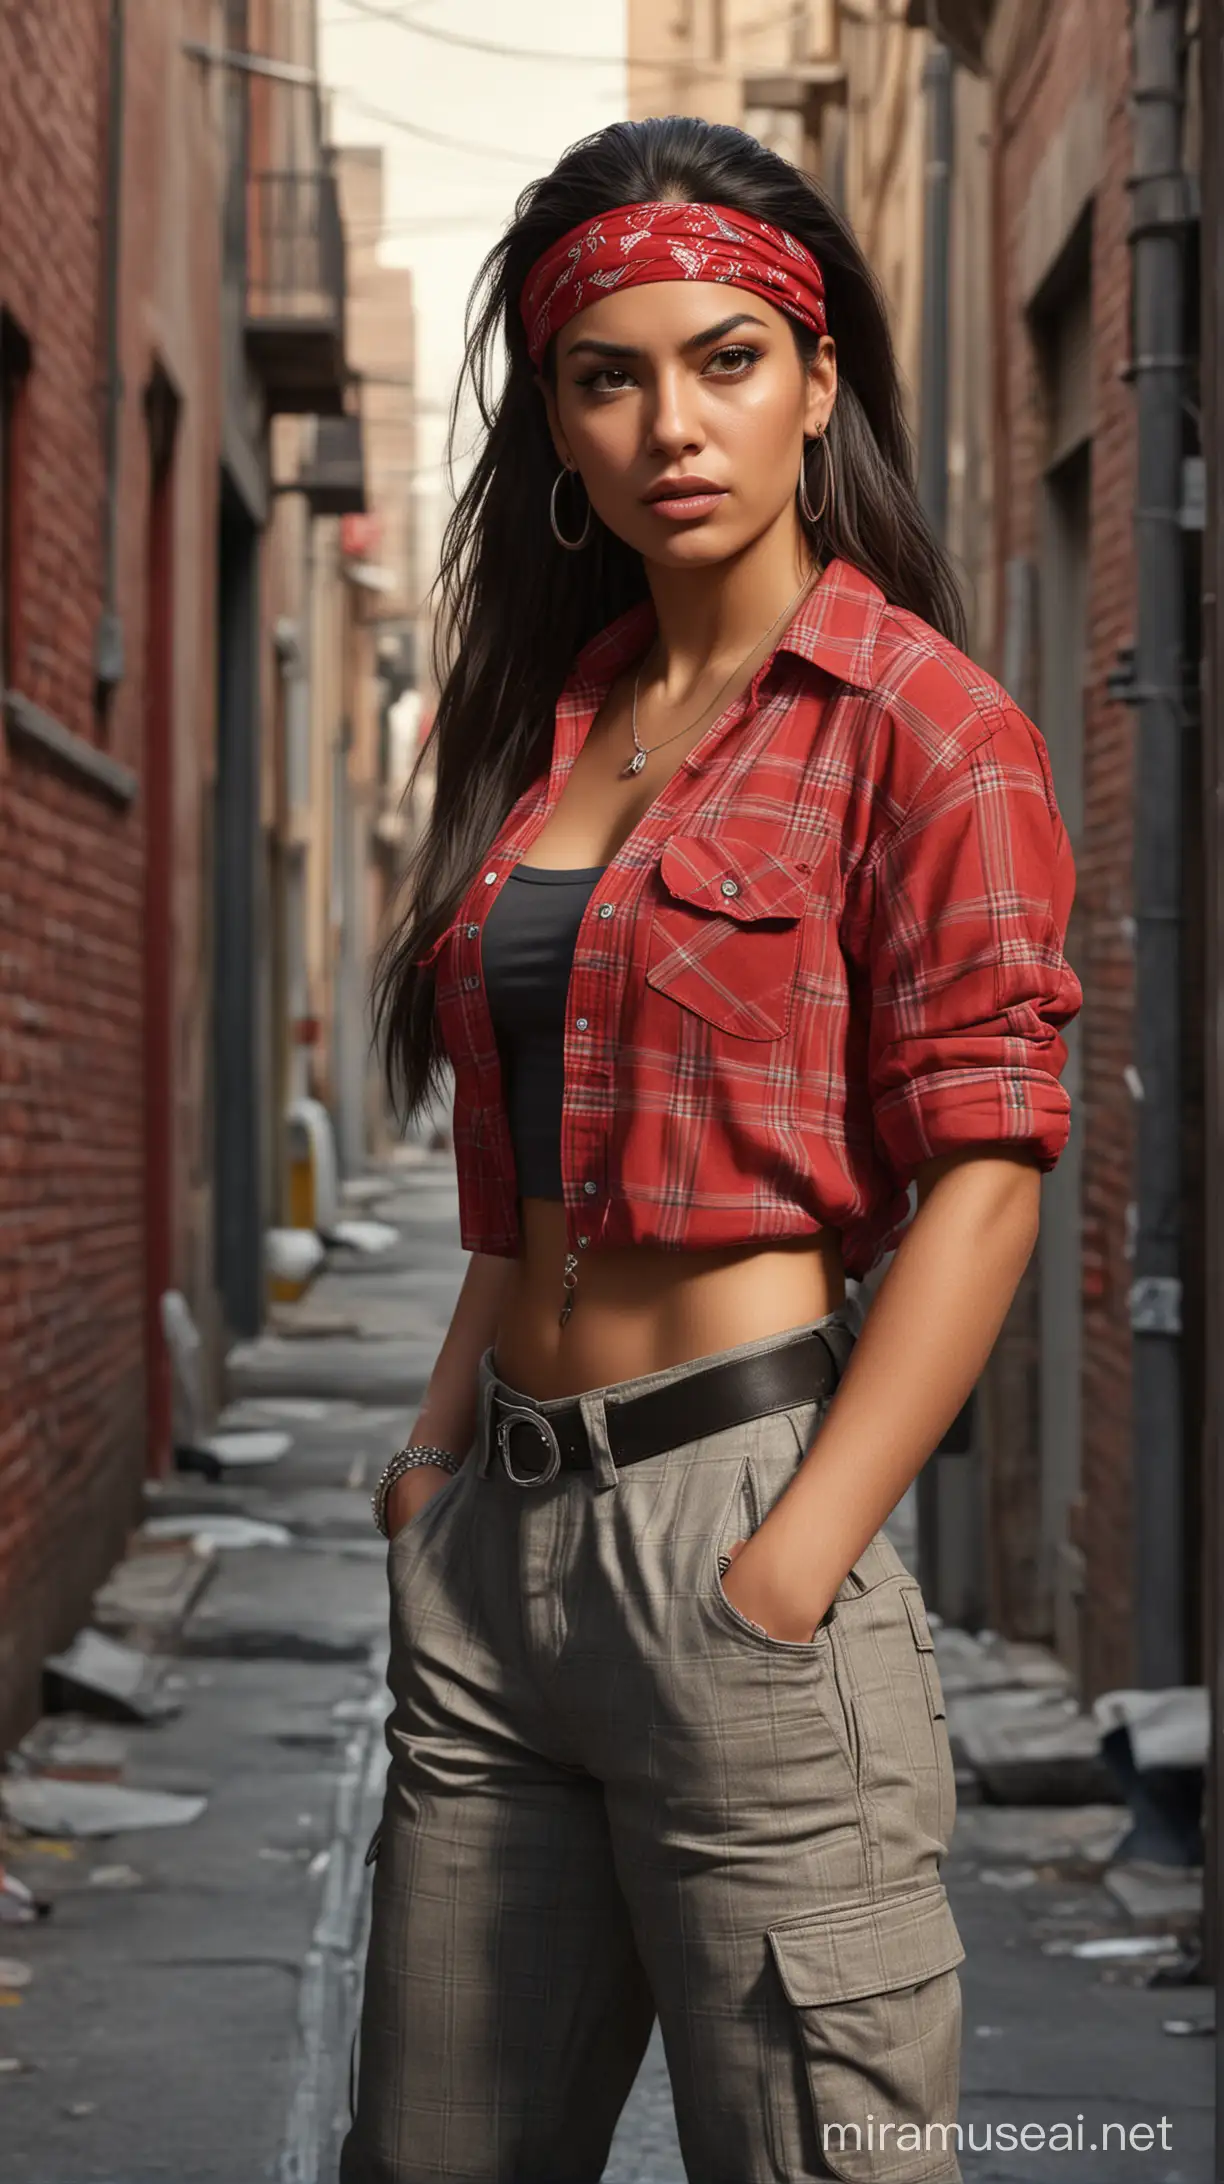 Fierce Female Hispanic Gangster in Urban Alley with Muscle Car